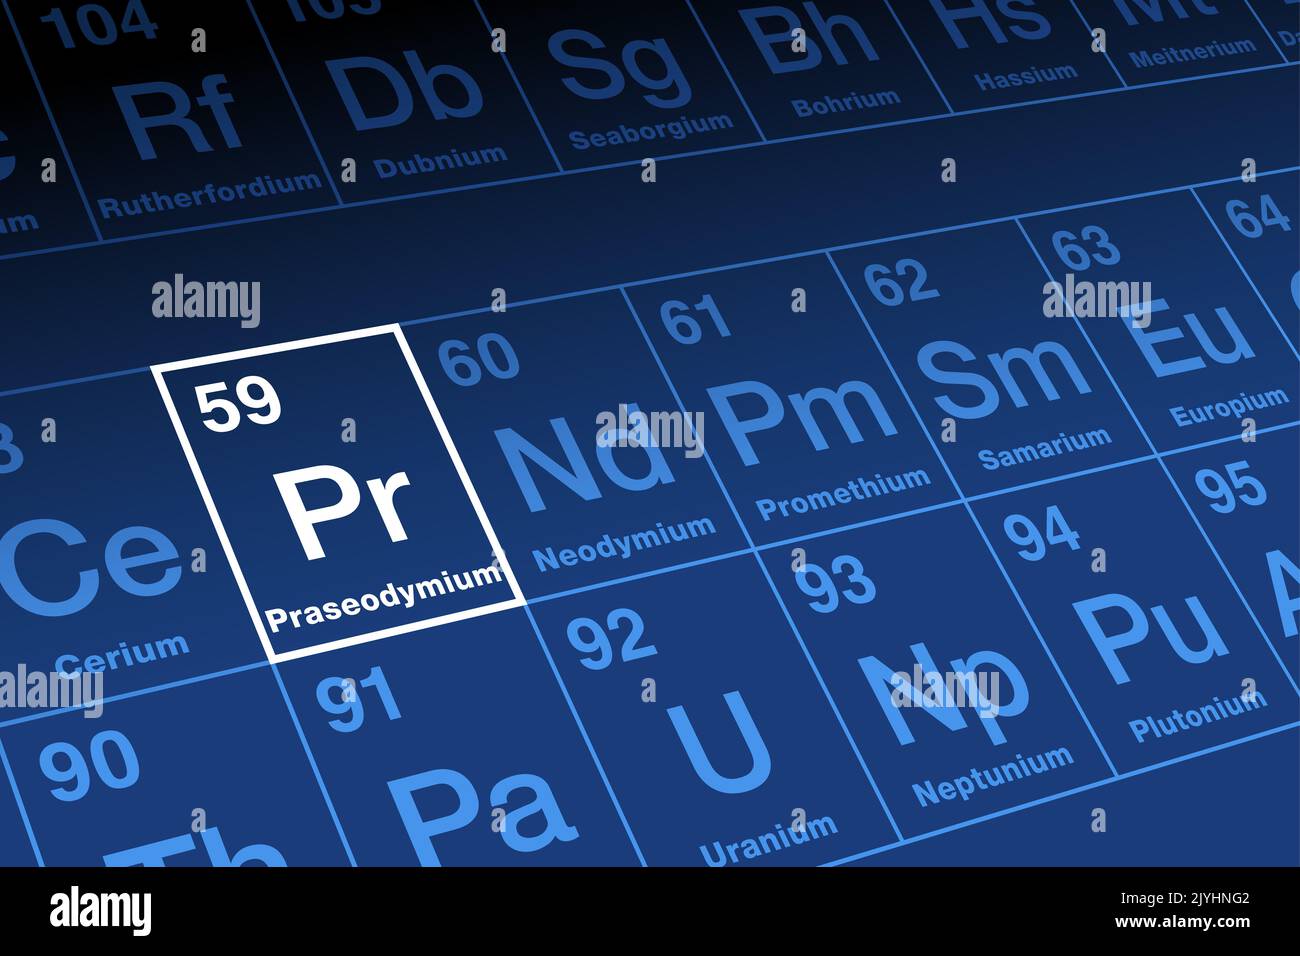 Praseodymium, on periodic table, in the lanthanide series. Rare earth metal with atomic number 59 and symbol Pr. Stock Photo